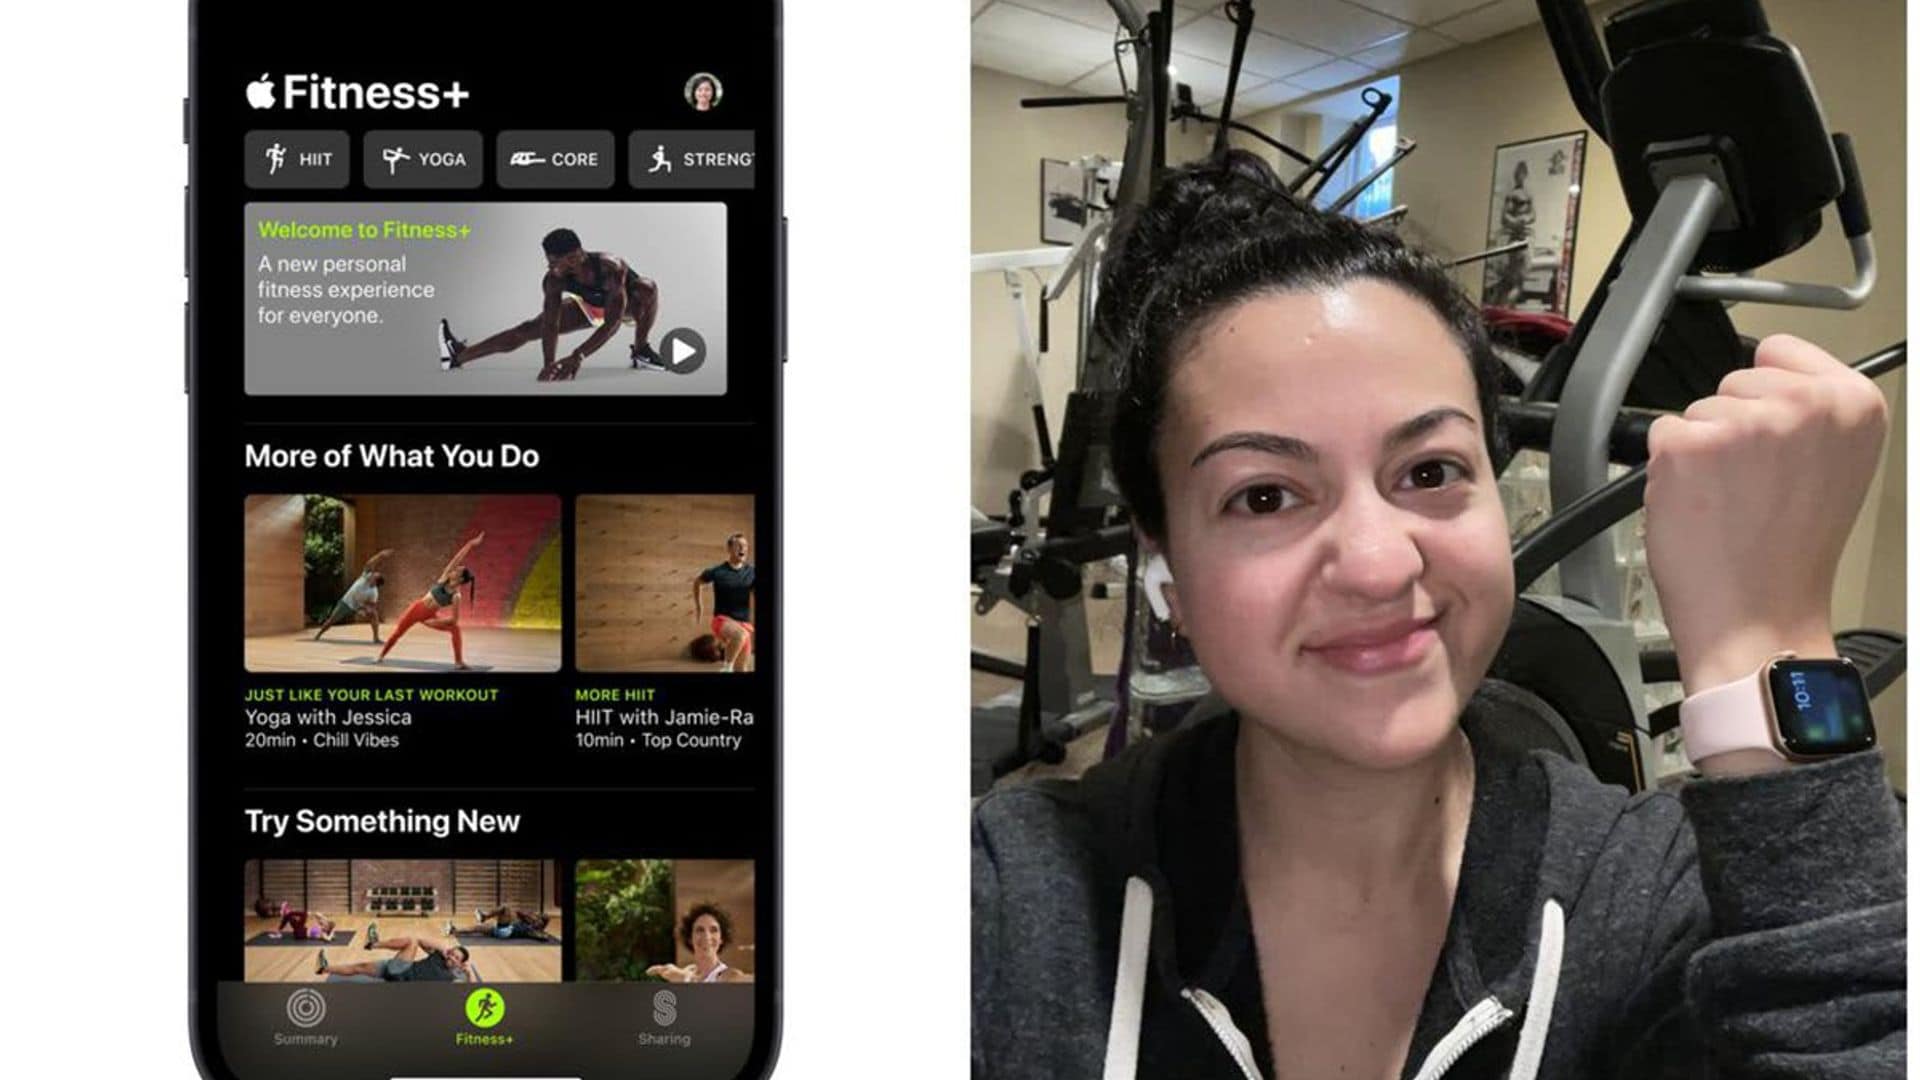 Apple Fitness+ has become one of our go-to online workout apps - here’s why (Review)